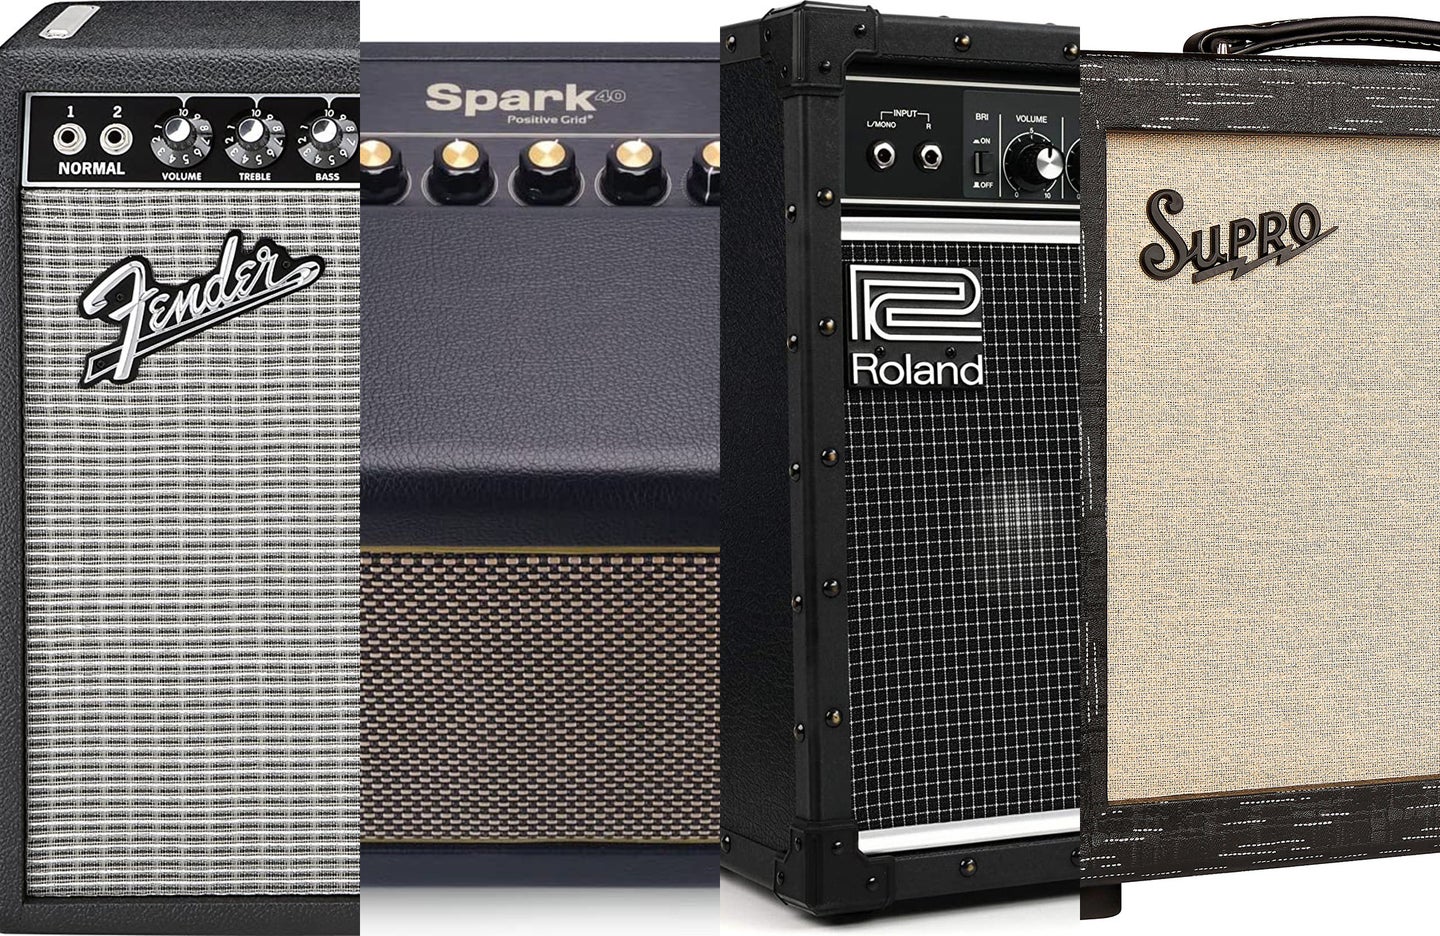 A lineup of the best guitar amps